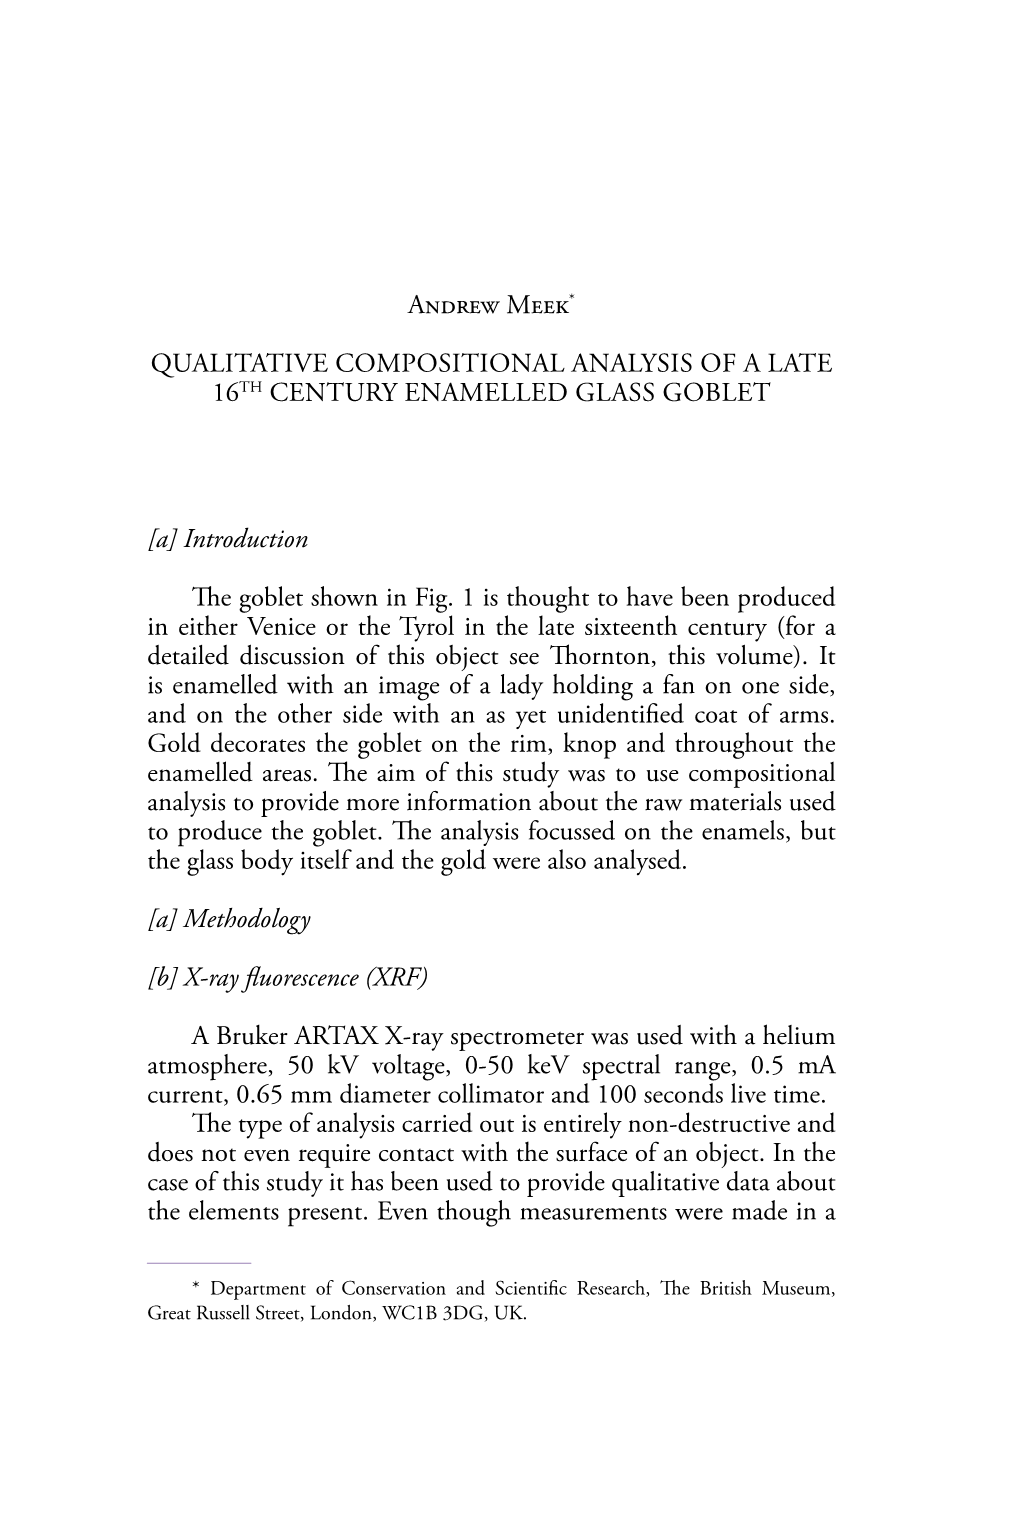 Andrew Meek* Qualitative Compositional Analysis of a Late